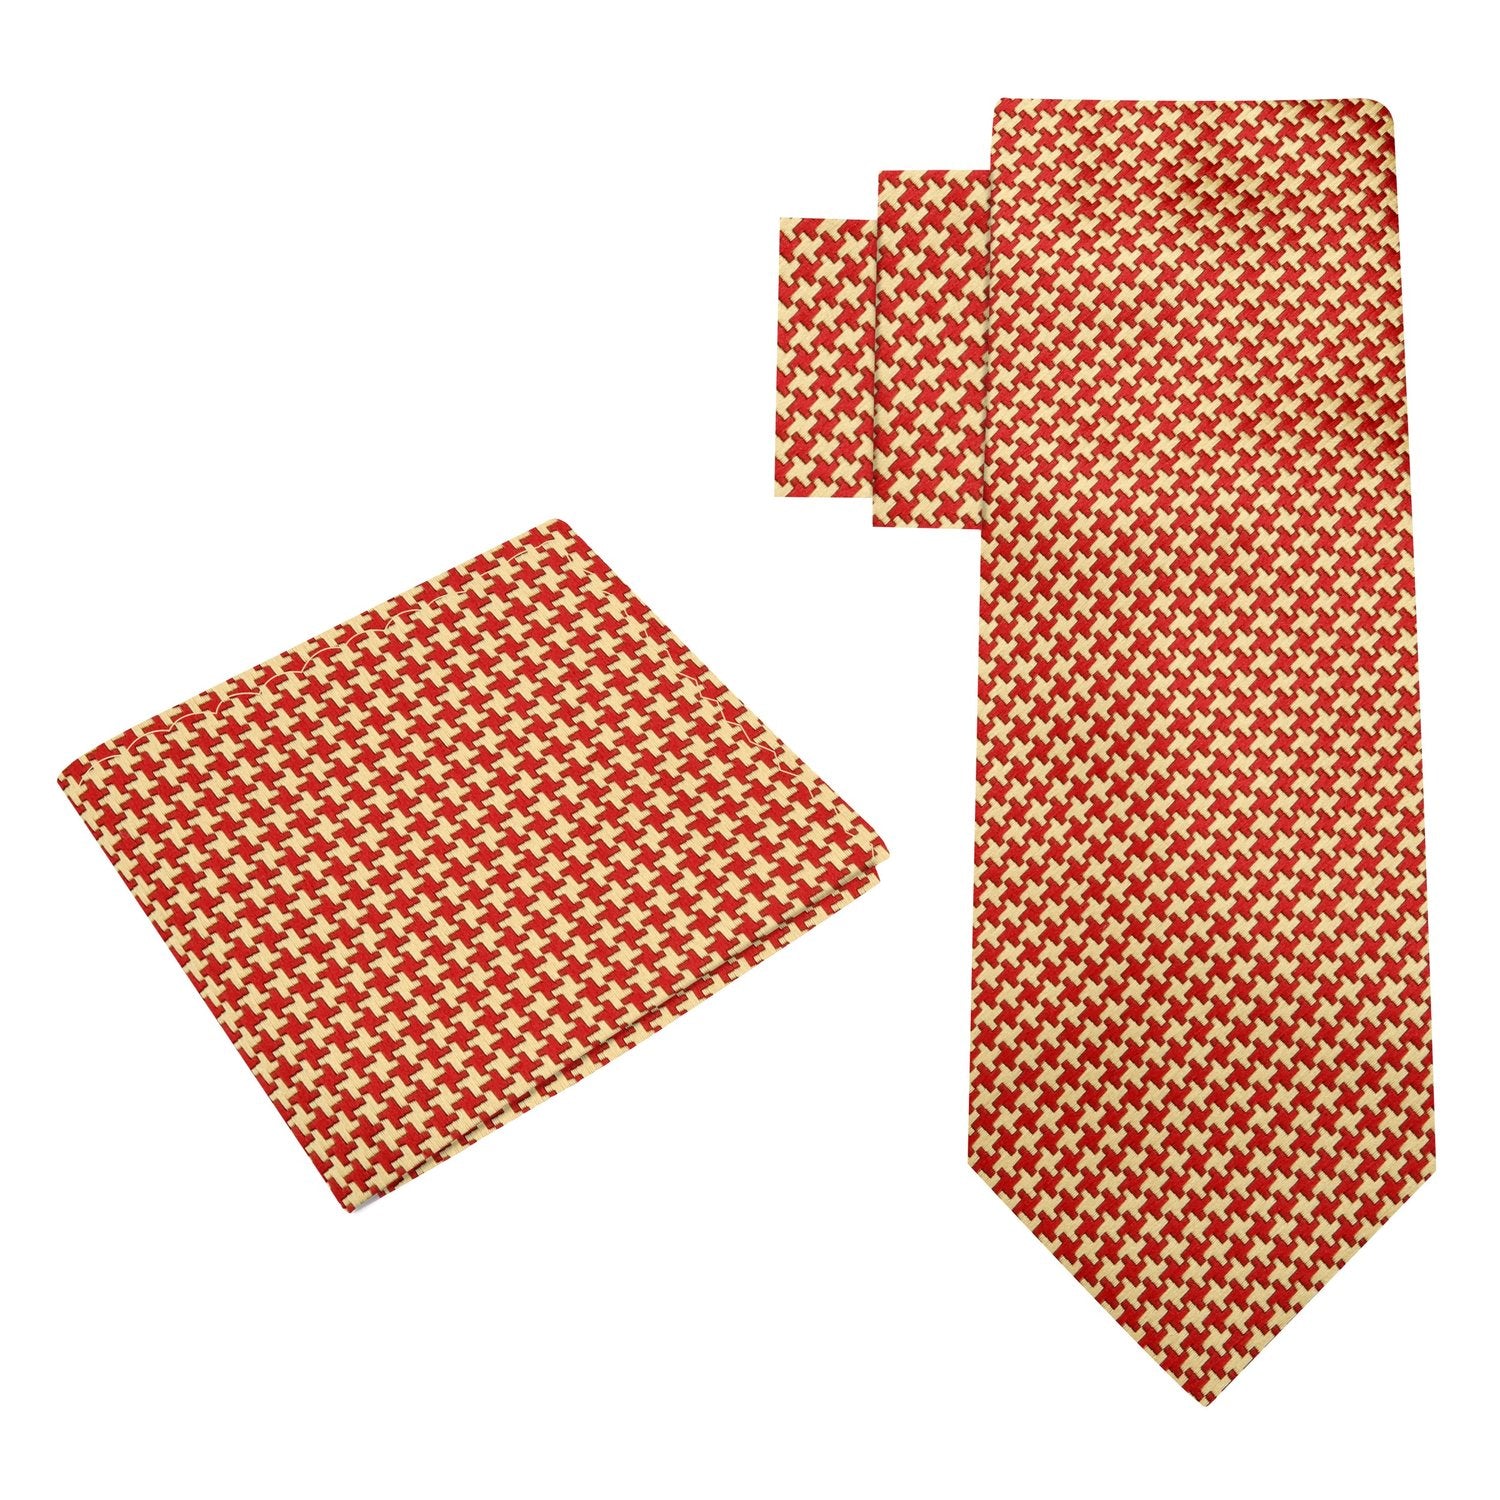 Alt View: Red and Gold Geometric Tie and Pocket Square